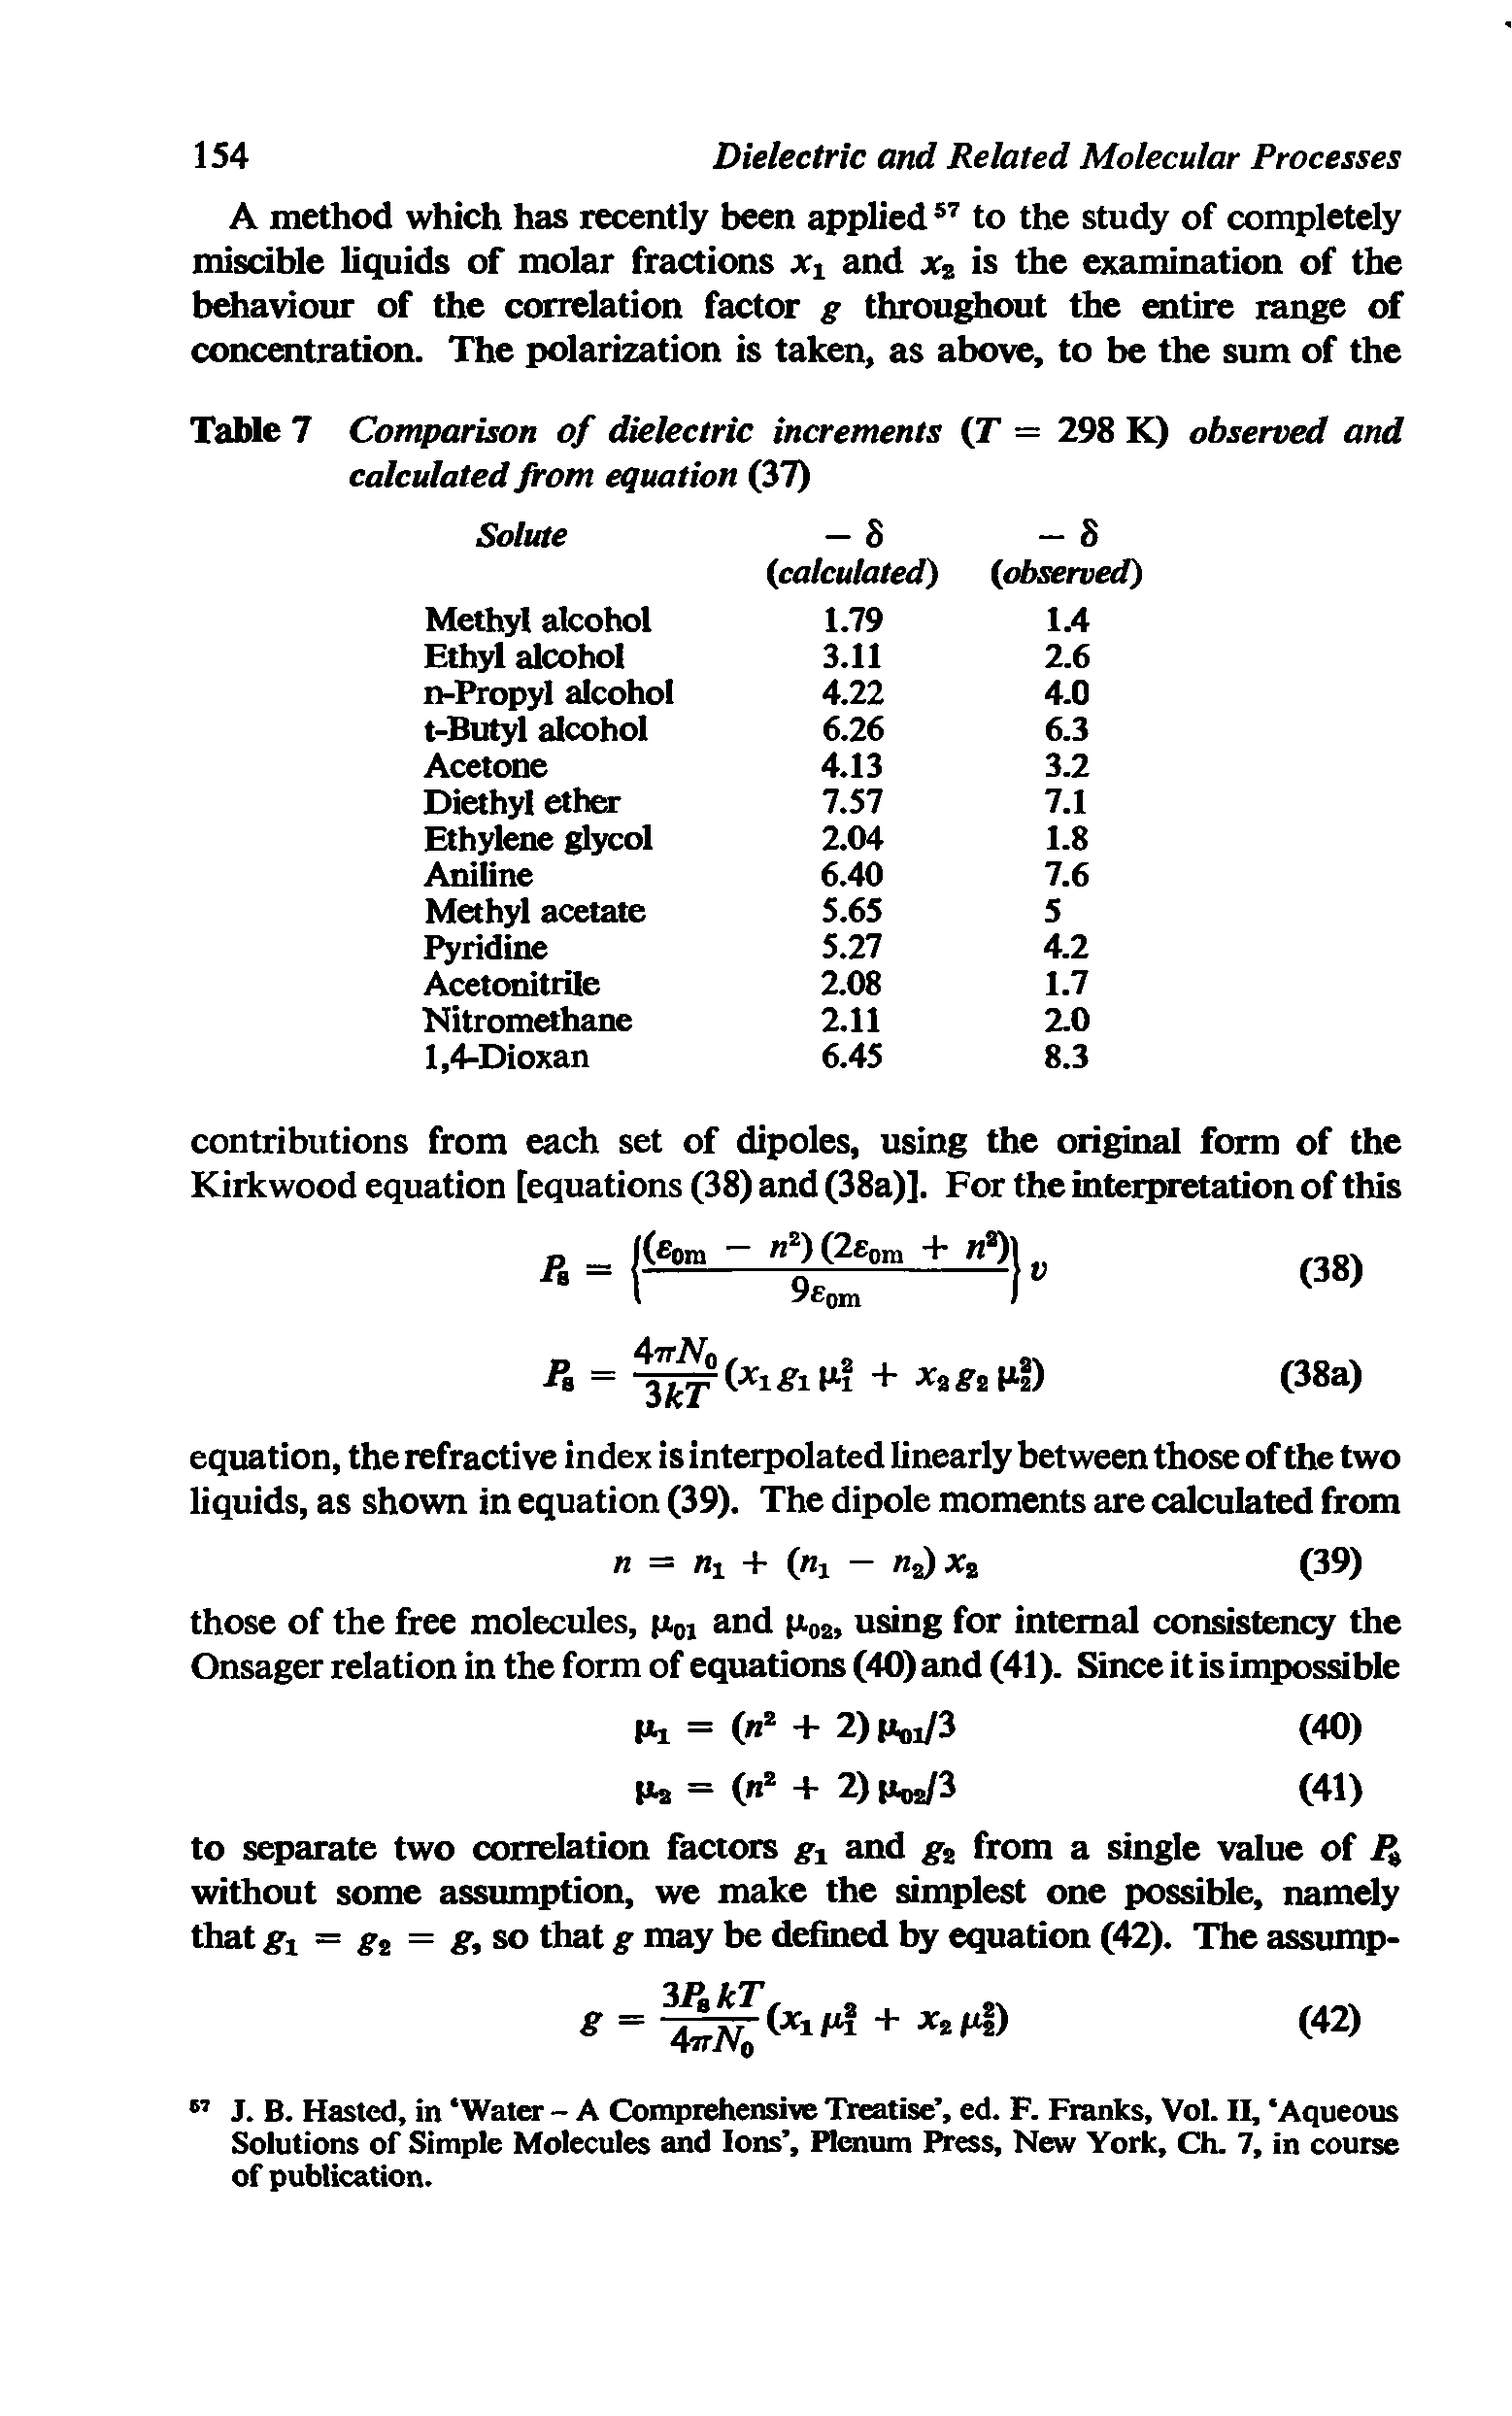 Table 7 Comparison of dielectric increments (T calculated from equation (37)...